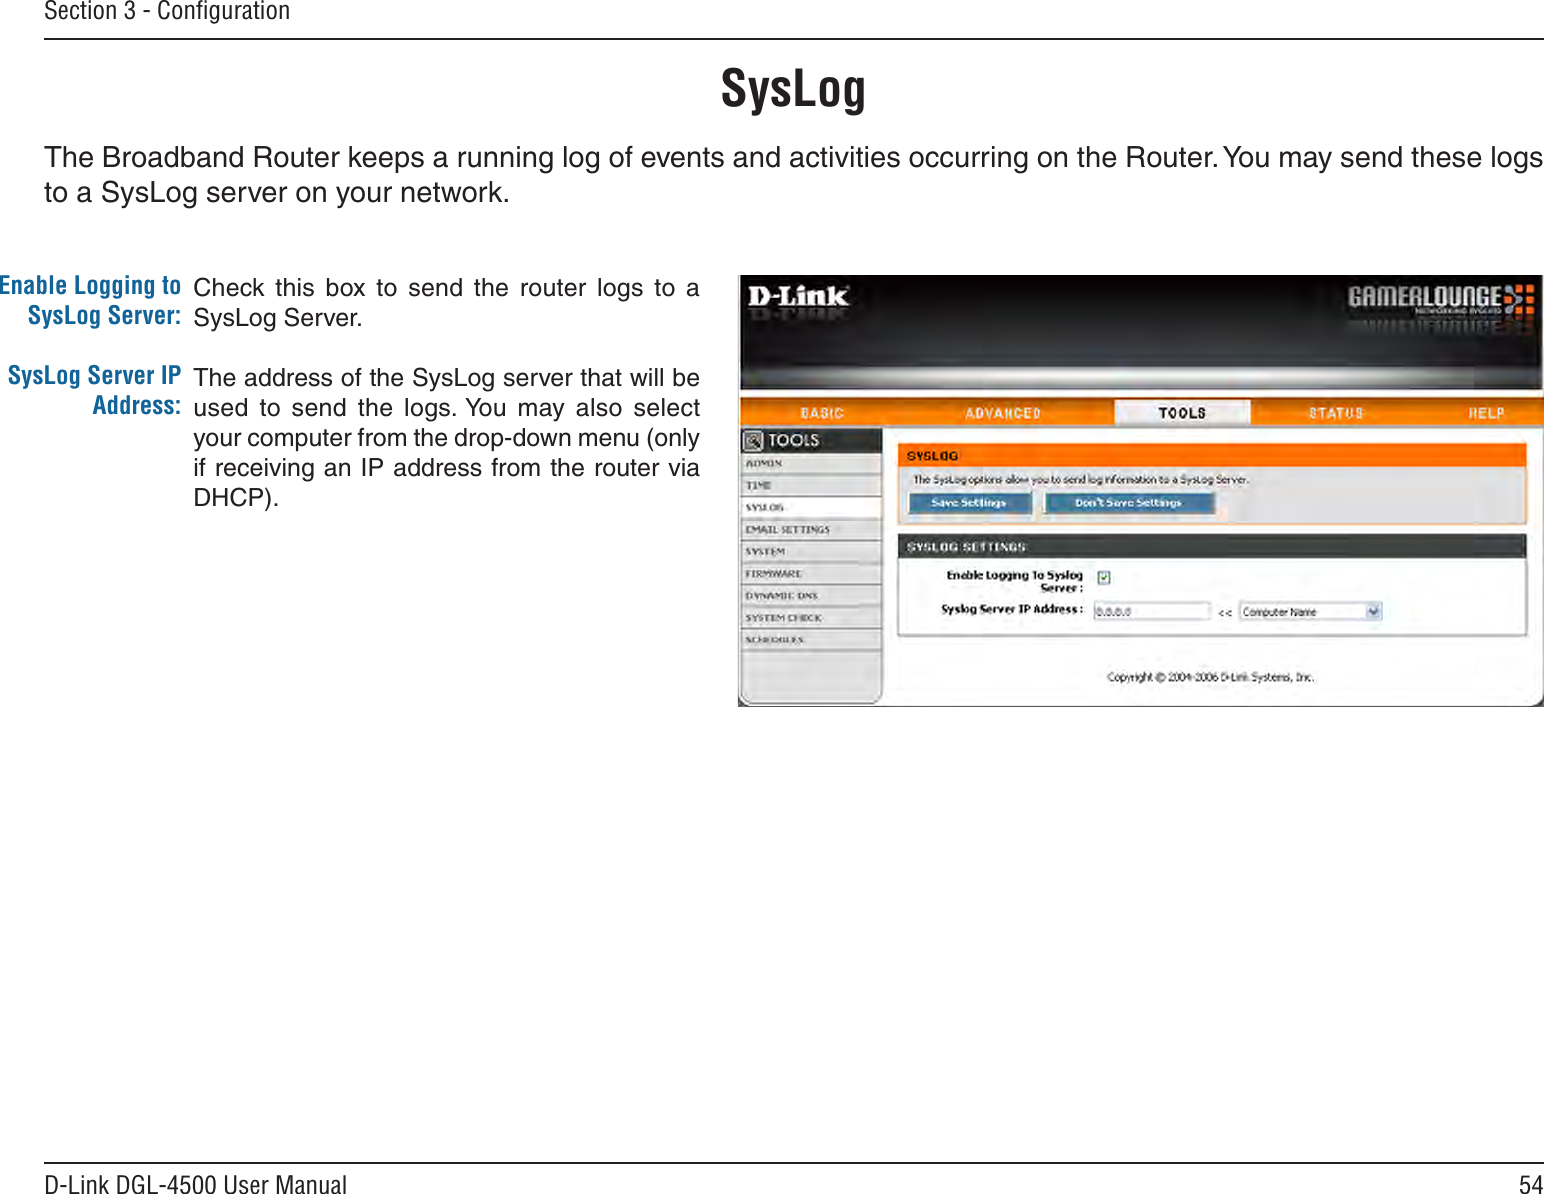 54D-Link DGL-4500 User ManualSection 3 - ConﬁgurationSysLogThe Broadband Router keeps a running log of events and activities occurring on the Router. You may send these logs to a SysLog server on your network.Enable Logging to SysLog Server:SysLog Server IP Address:Check this  box  to  send  the  router  logs  to  a SysLog Server.The address of the SysLog server that will be used  to  send  the  logs. You  may  also  select your computer from the drop-down menu (only if receiving an IP address from the router via DHCP).